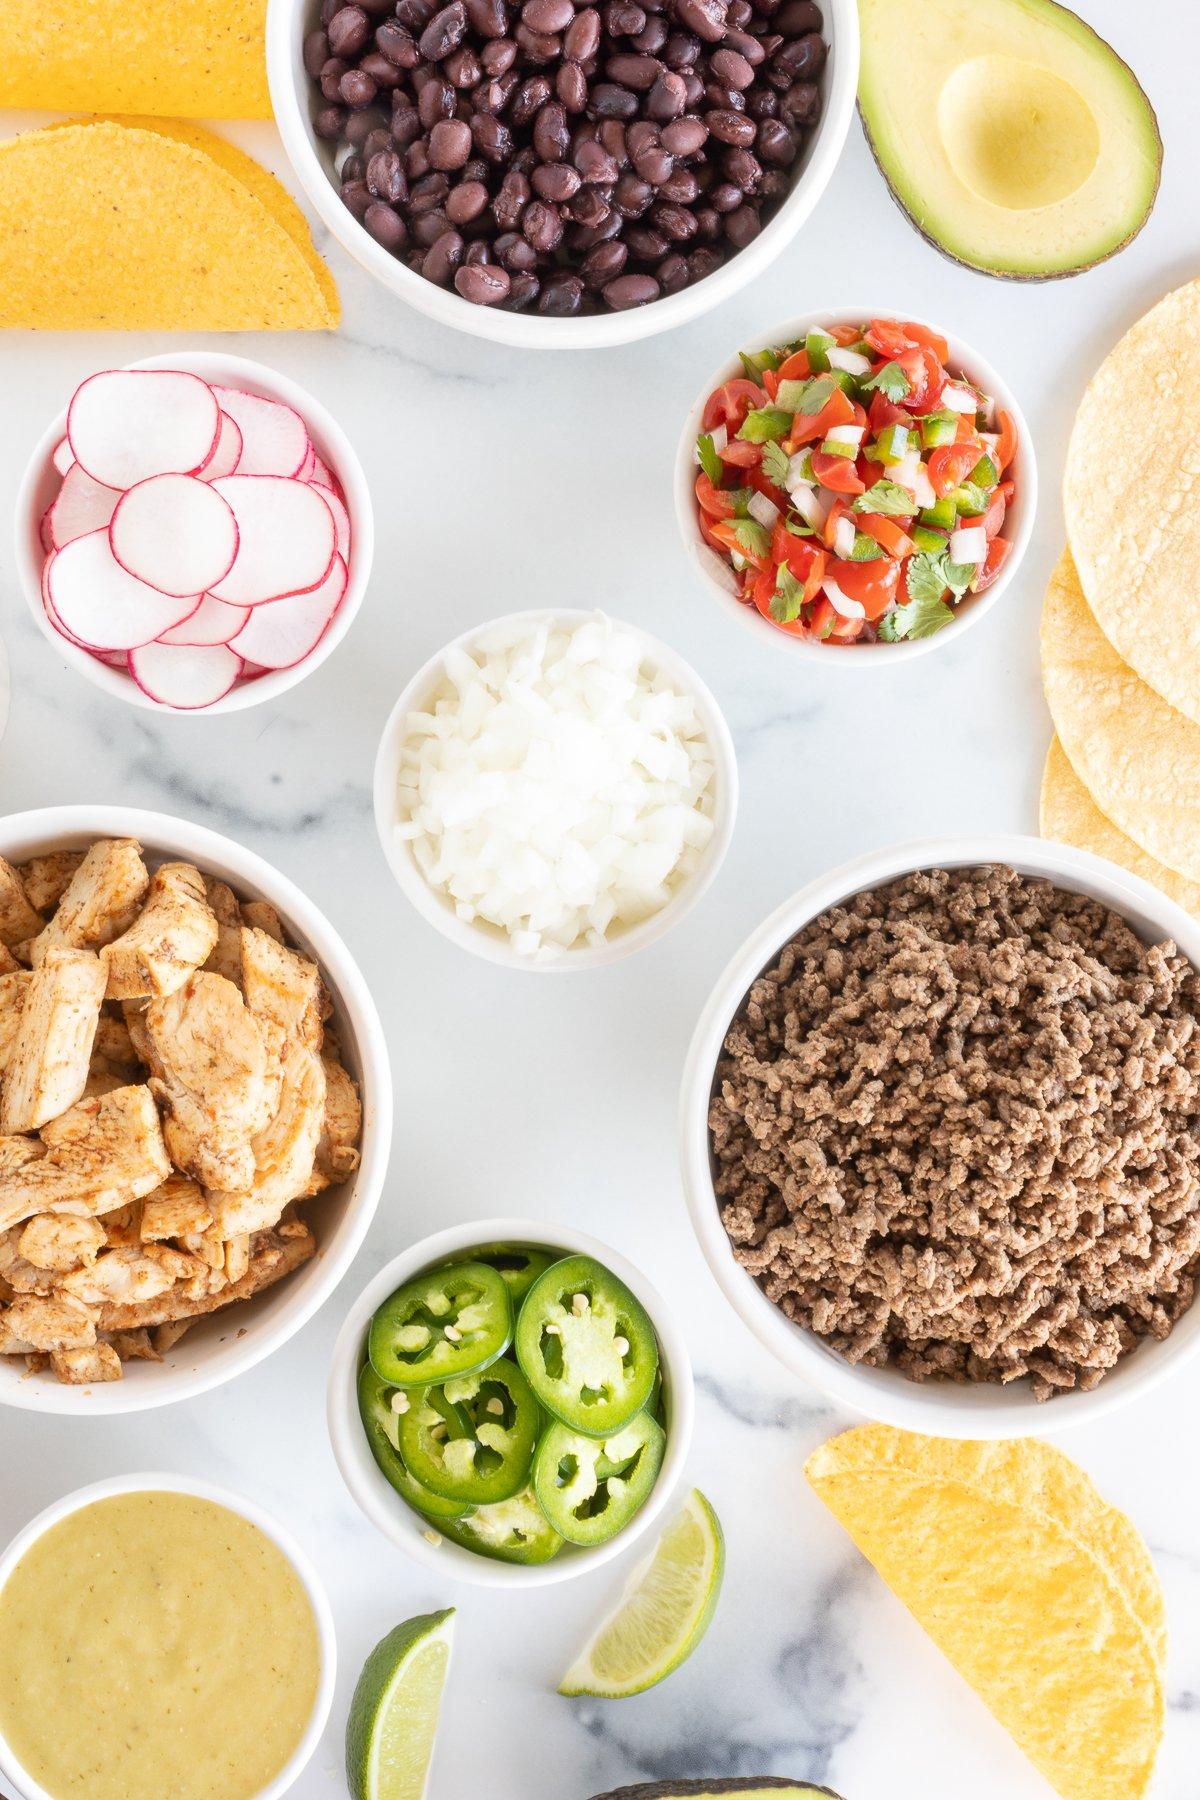 Taco toppings, including sliced radishes, chopped onions and sliced jalapenos on a marble countertop.